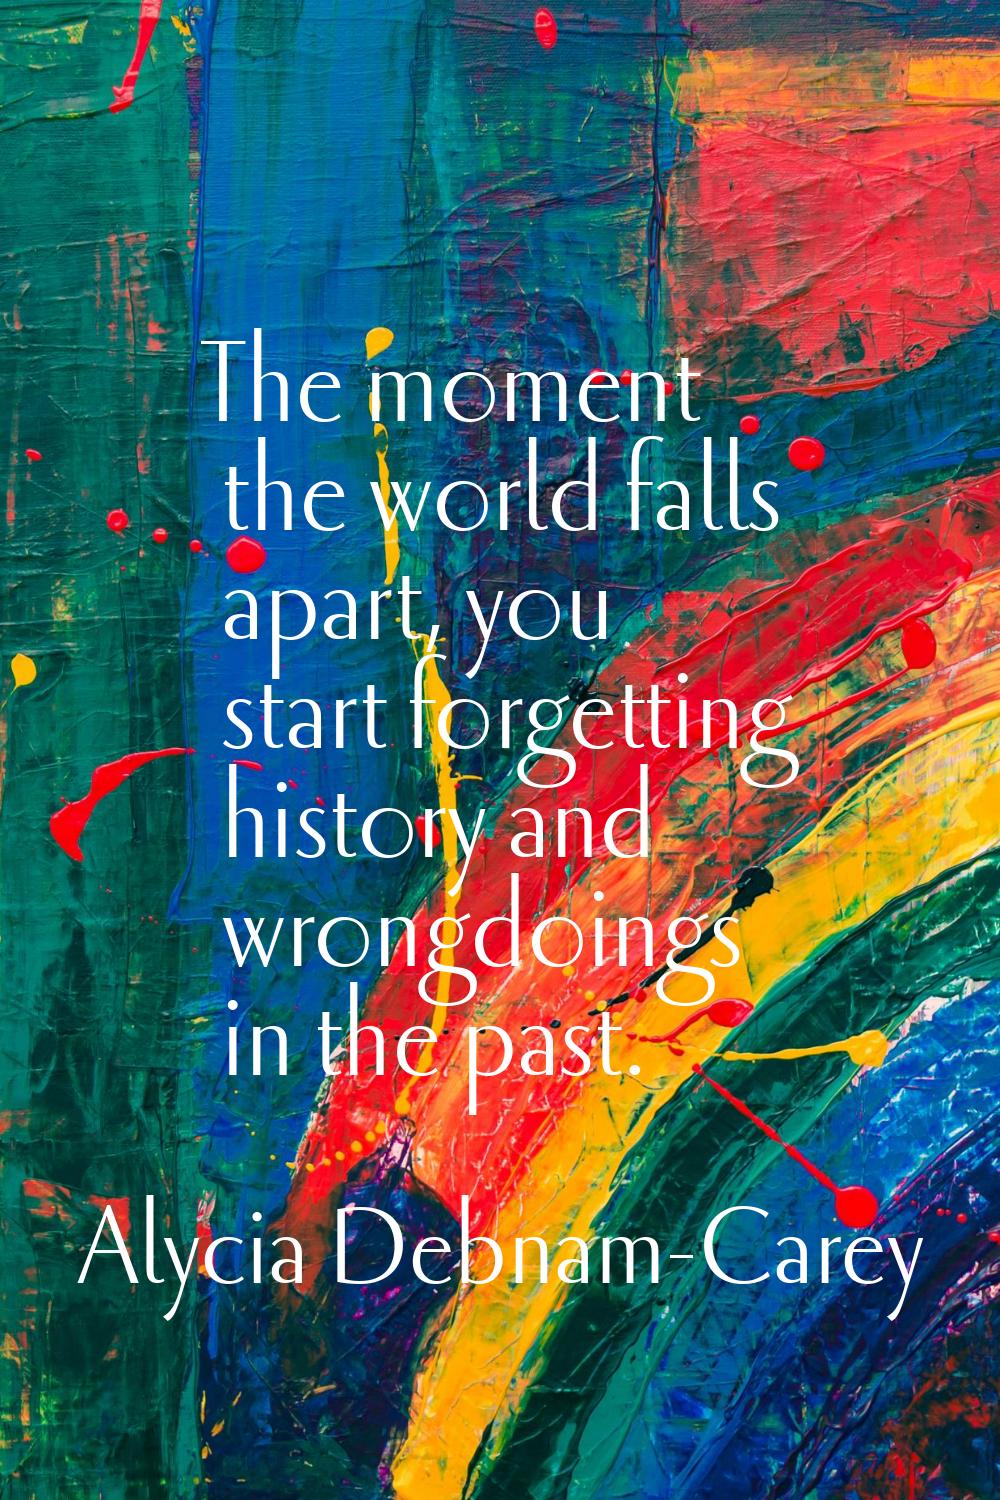 The moment the world falls apart, you start forgetting history and wrongdoings in the past.